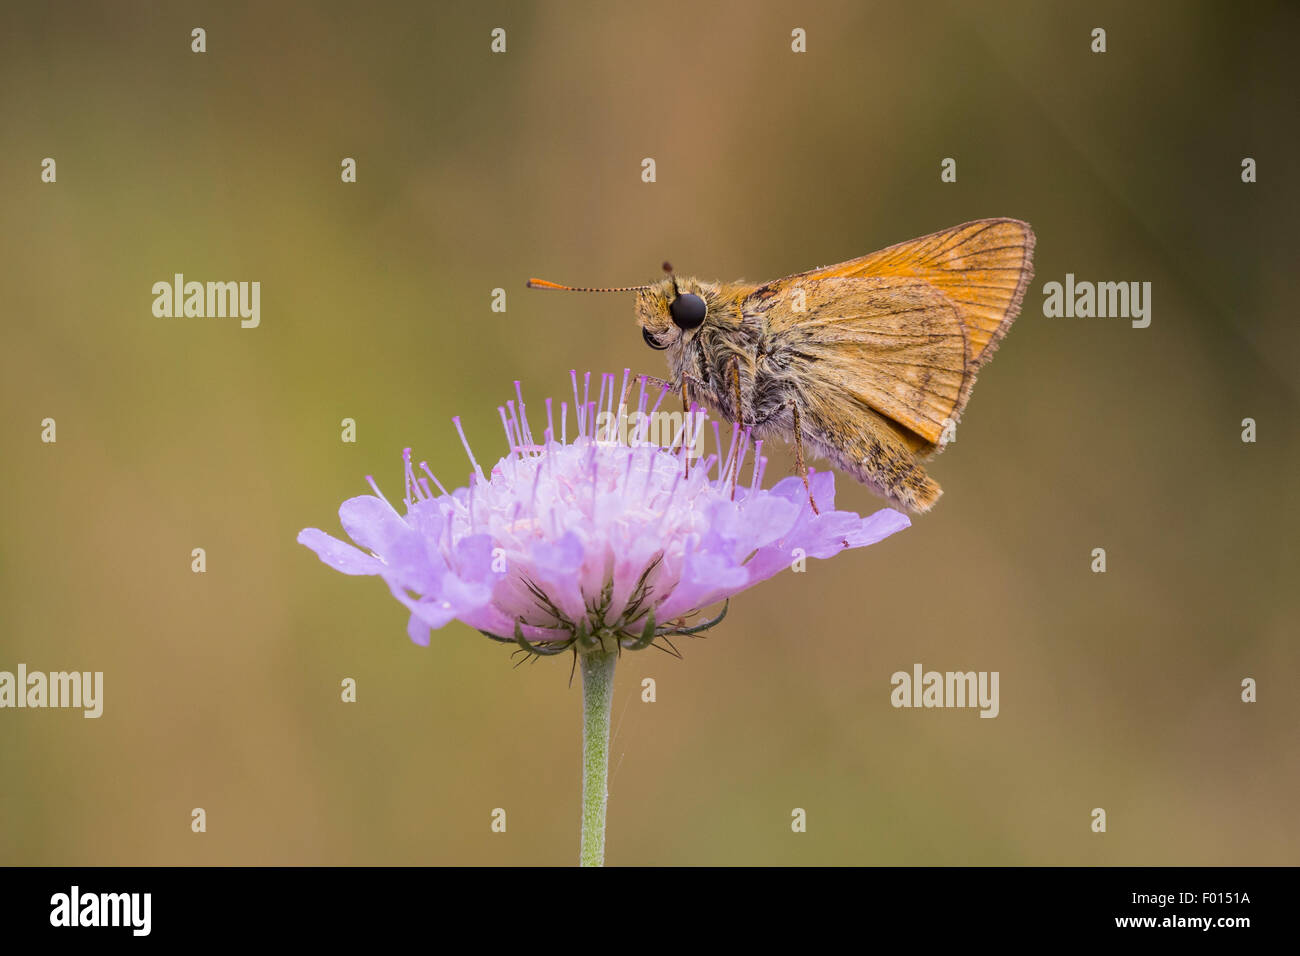 Large skipper butterfly eating nectar from the flower of Scabiosa columbaria, side view. Flora and fauna are well presented here Stock Photo